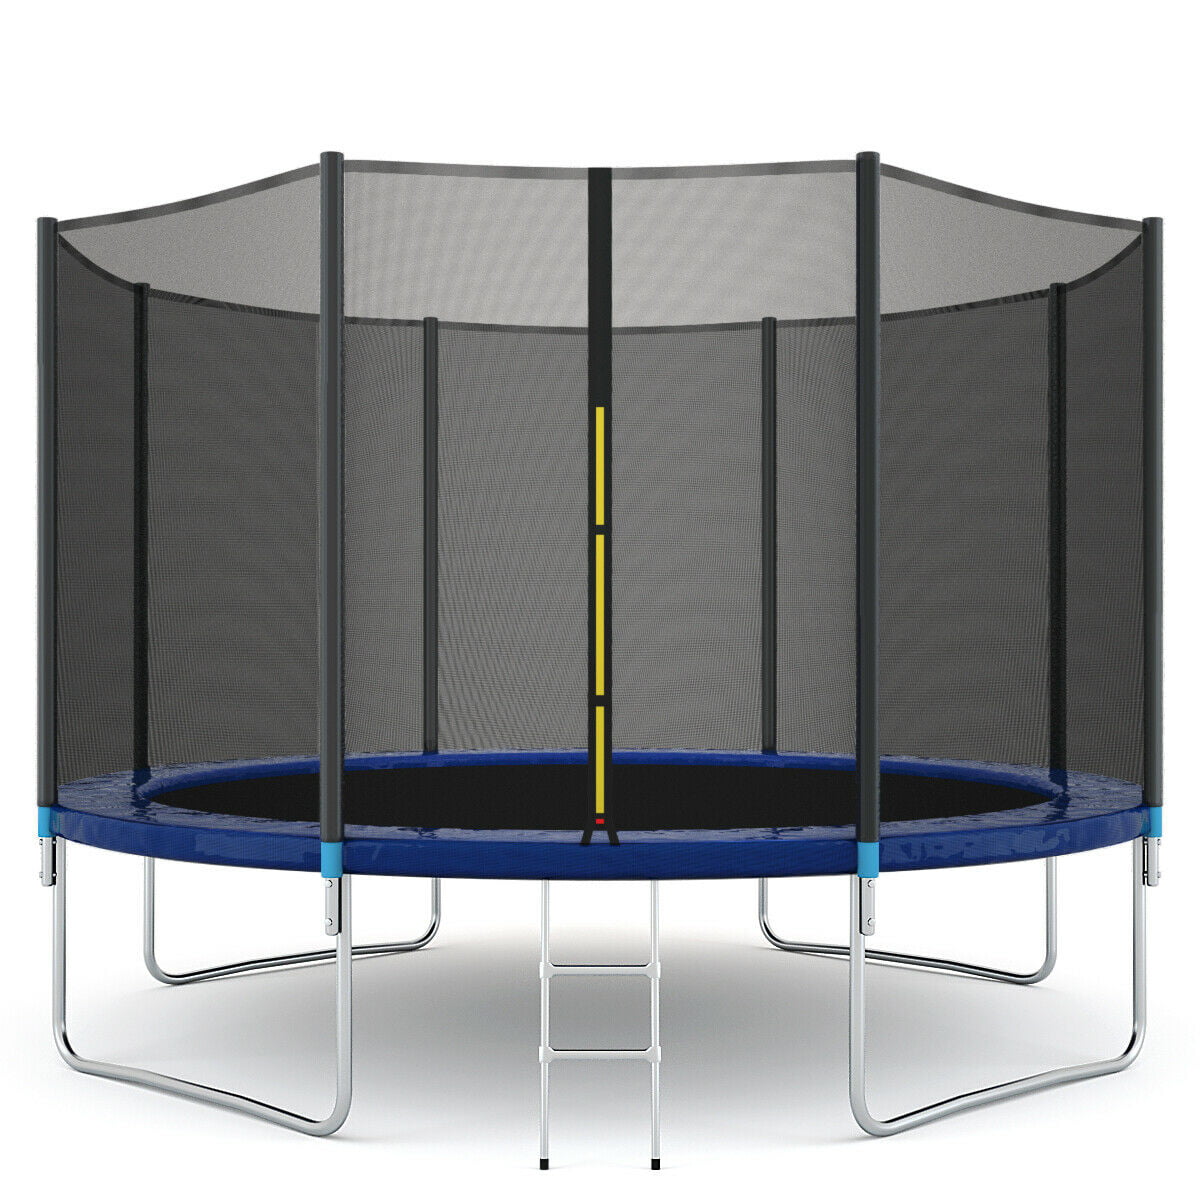 CODODKI 12 FT Kids Trampoline with Enclosure Net Jumping Mat and Spring Cover Padding Indoor Outdoor Fun Summer Exercise Fitness Water Toys Yard Trampolines for Children Adult 